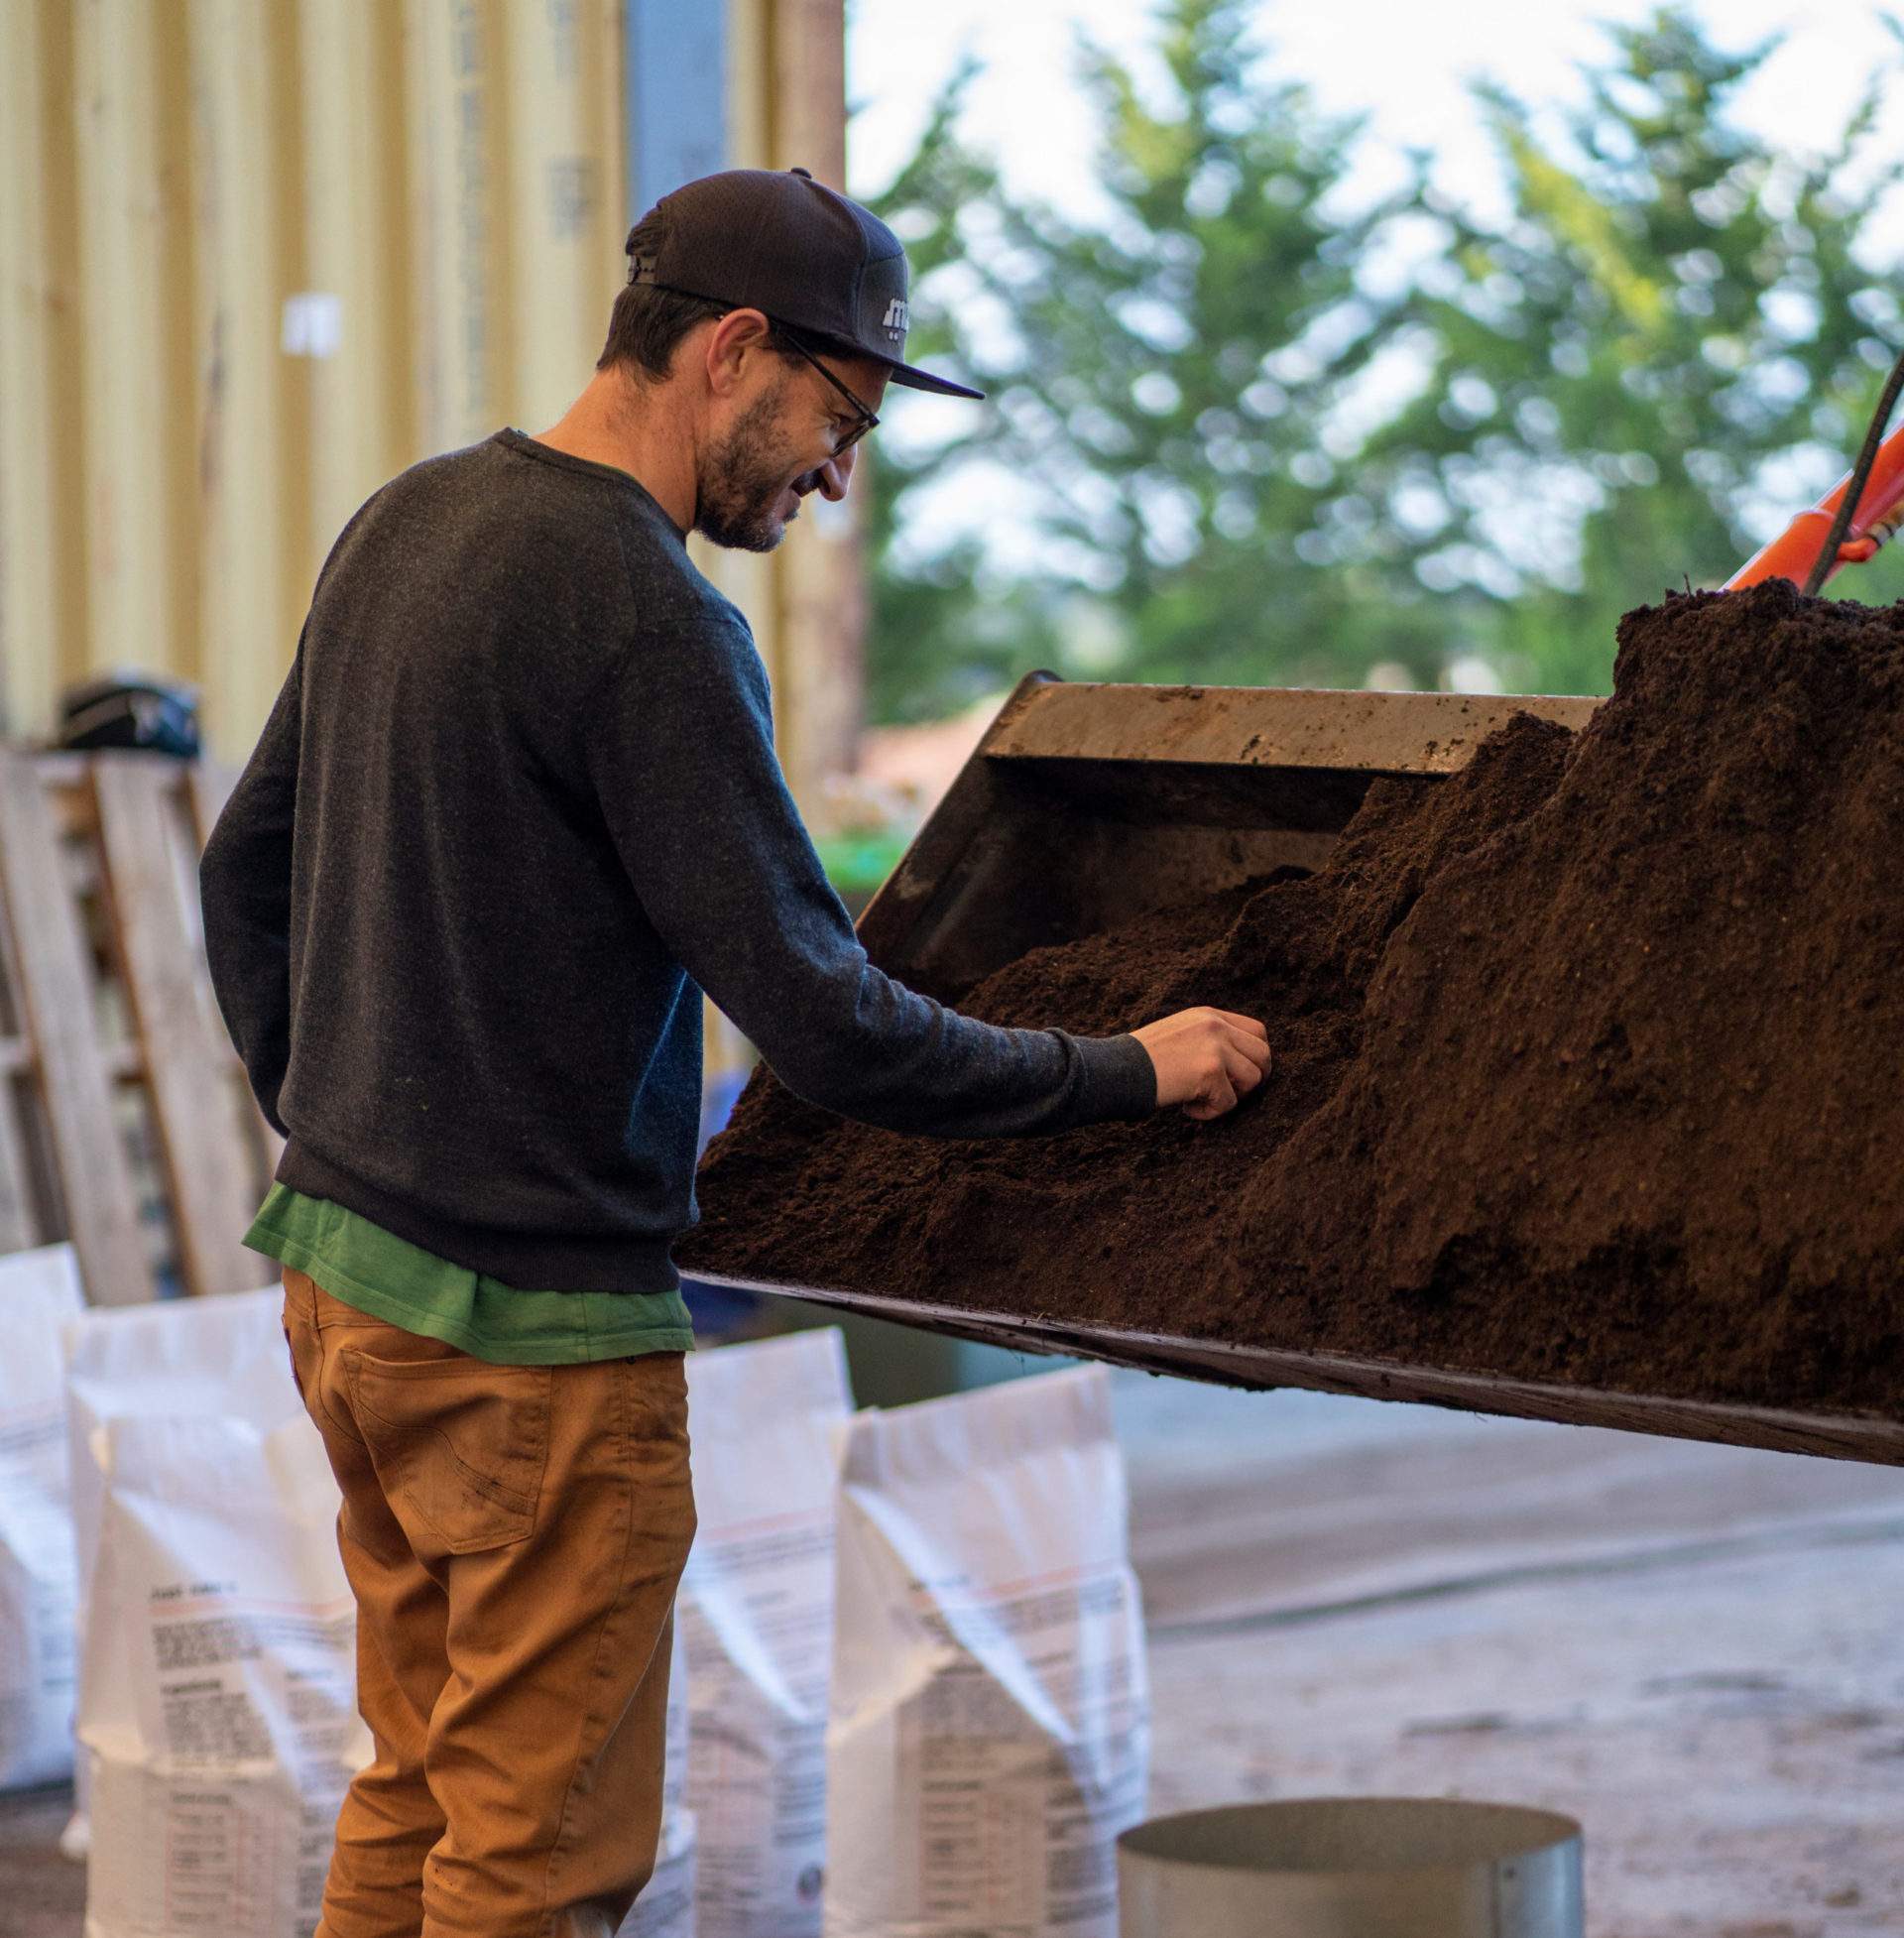 Photograph of man checking the quality of living soil